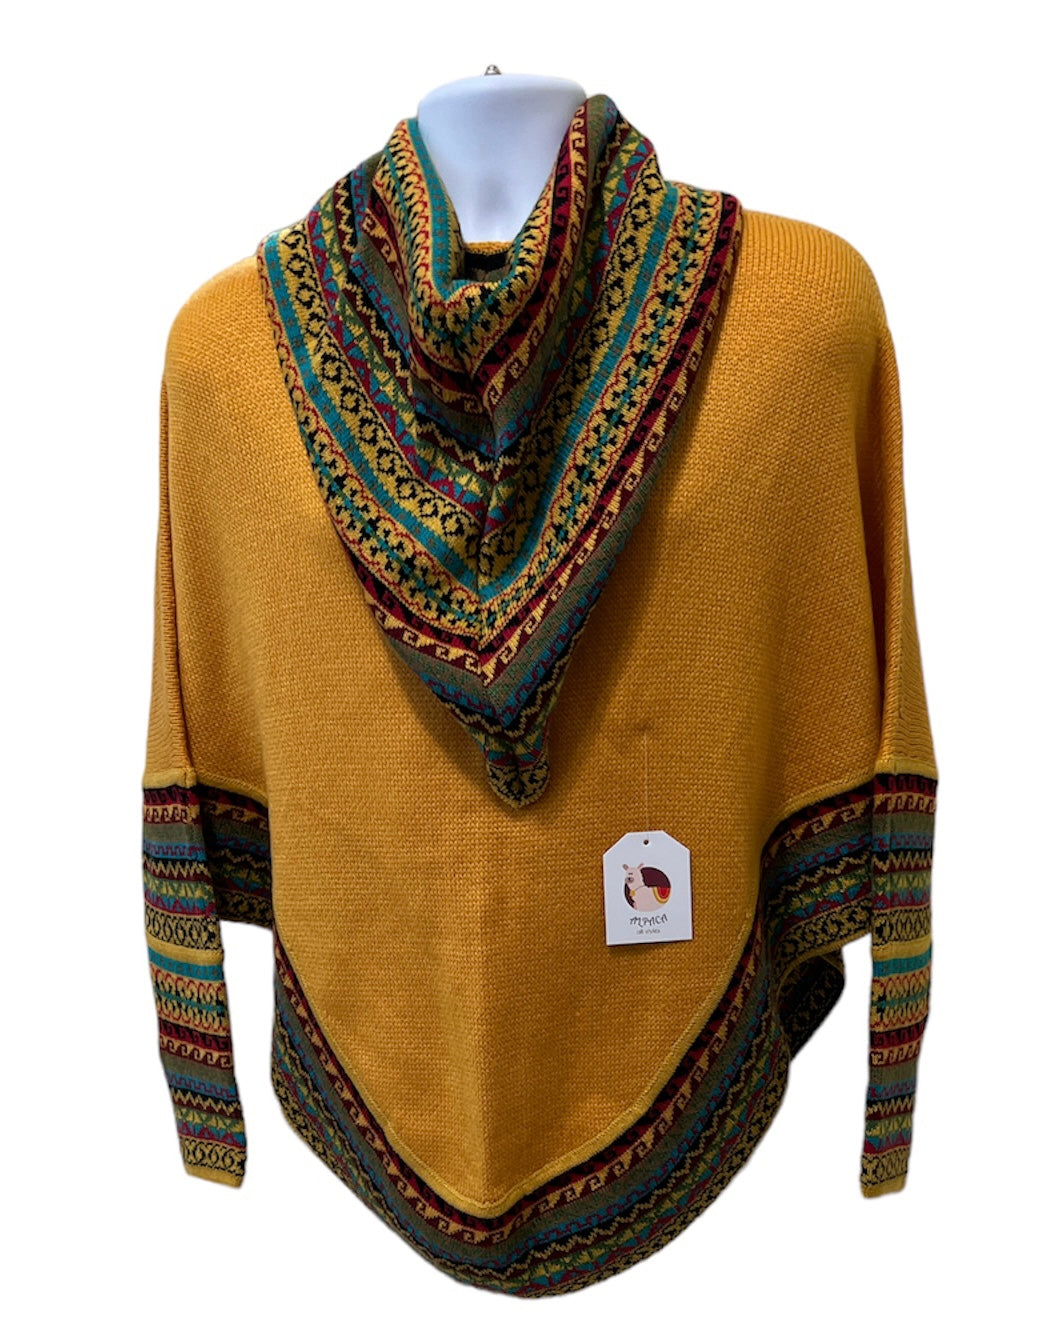 LIMITED EDITION ALPACA YELLOW HOODY PONCHO WITH SLEEVES